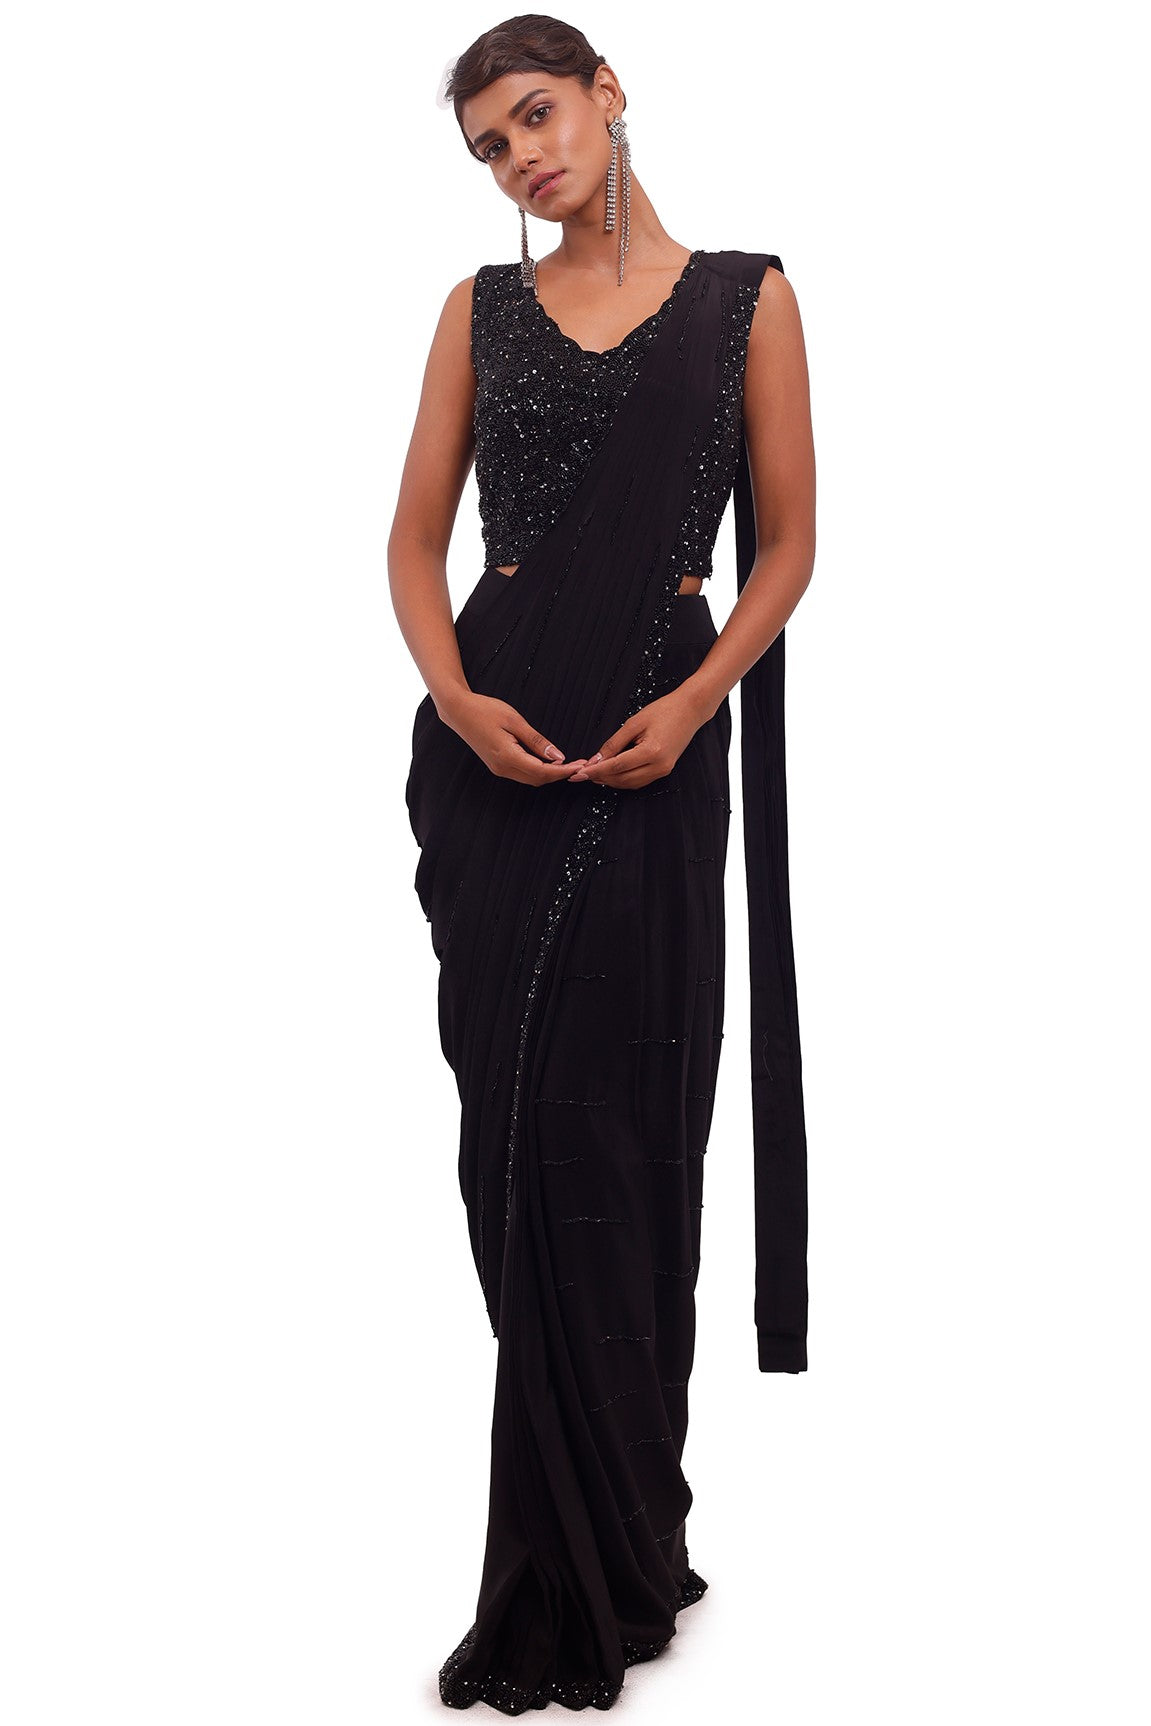 Buy beautiful black crepe draped saree online in USA with sequin blouse. Look your best at parties and weddings in beautiful designer sarees, embroidered sarees, handwoven sarees, silk sarees, organza saris from Pure Elegance Indian saree store in USA.-full view